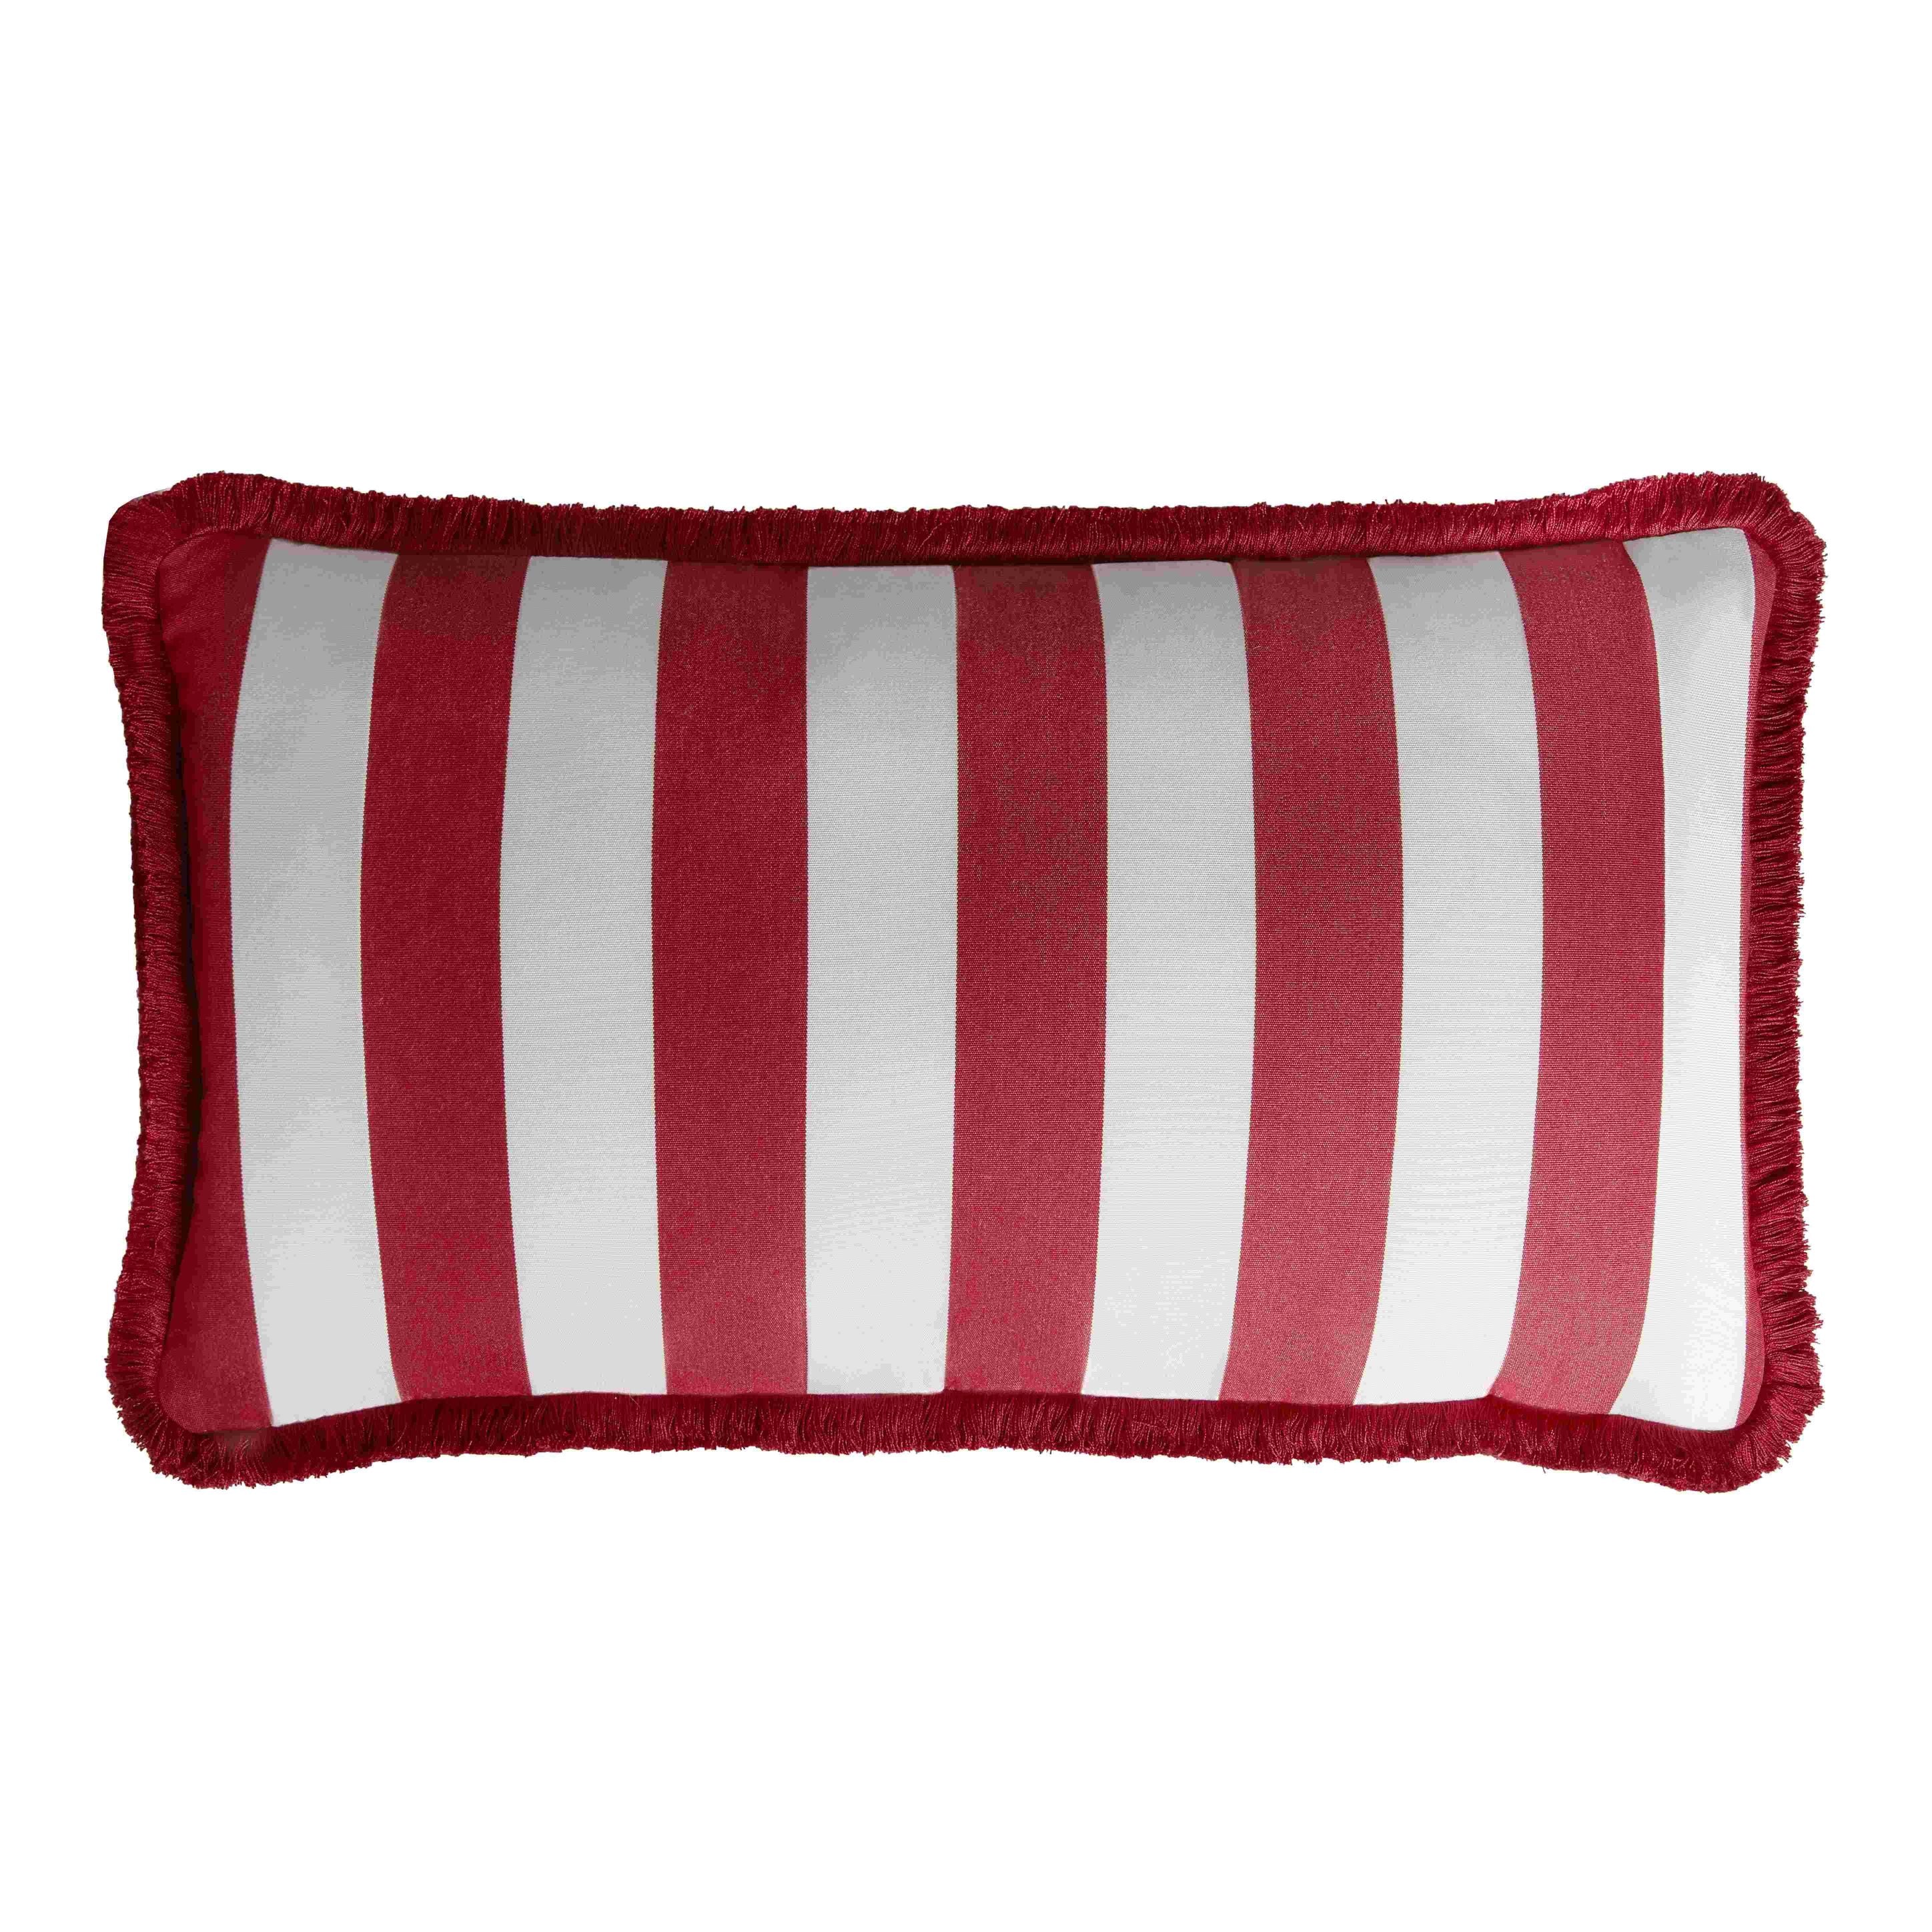 Lo Decor Red Striped Happy Pillow with Fringes